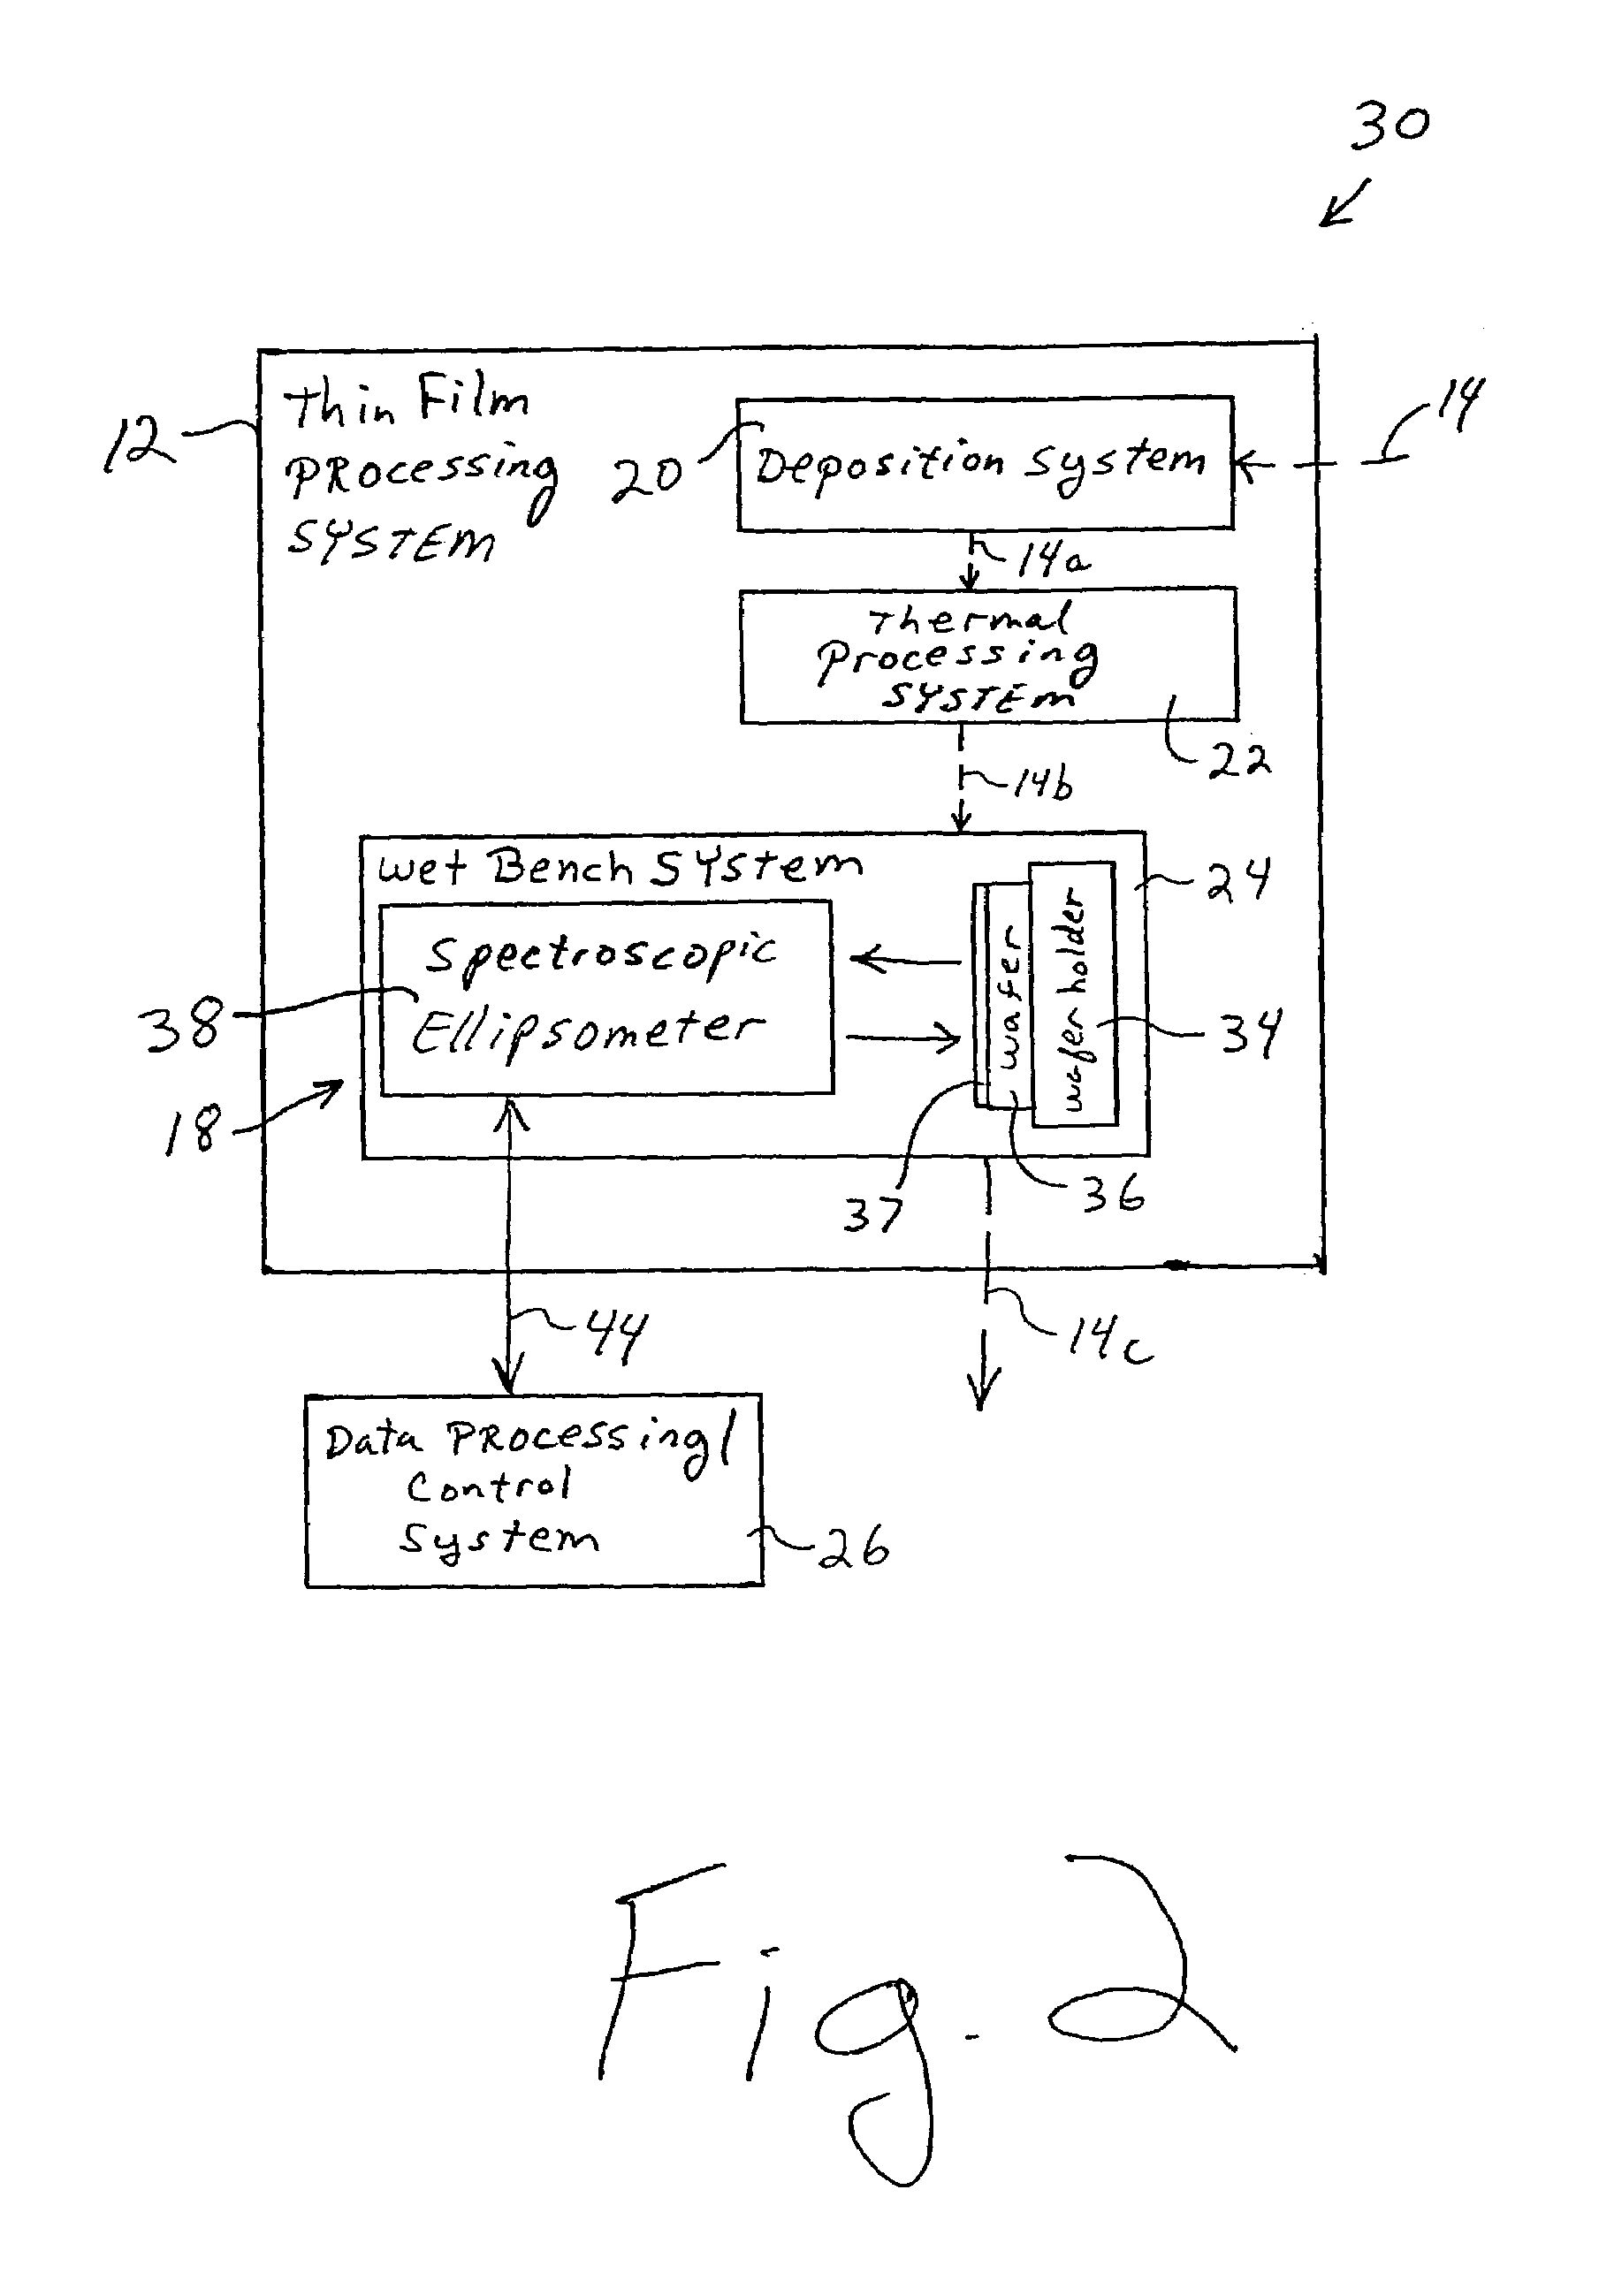 In-situ metrology system and method for monitoring metalization and other thin film formation